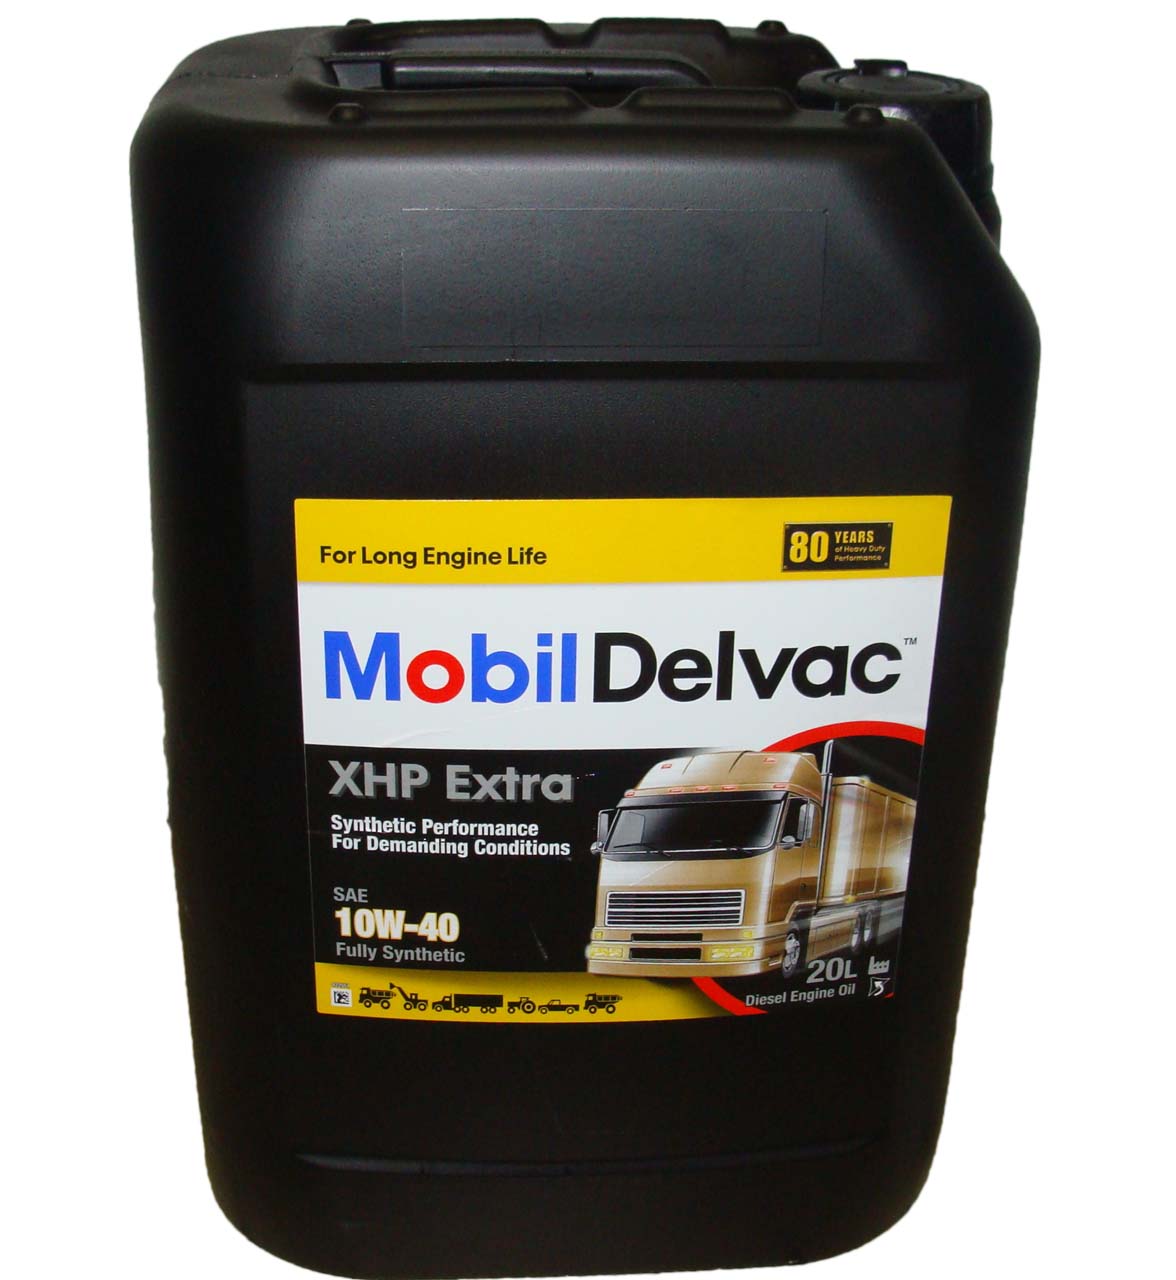 Масло mobil 20л. Mobil масло Delvac XHP Extra 10w40 20л. Мобил Делвак 10w 40 XHP Extra. Мобил XHP Extra 10w-40. Масло моторное mobil Delvac XHP Extra 10w 40 синтетическое 20 л 152712.